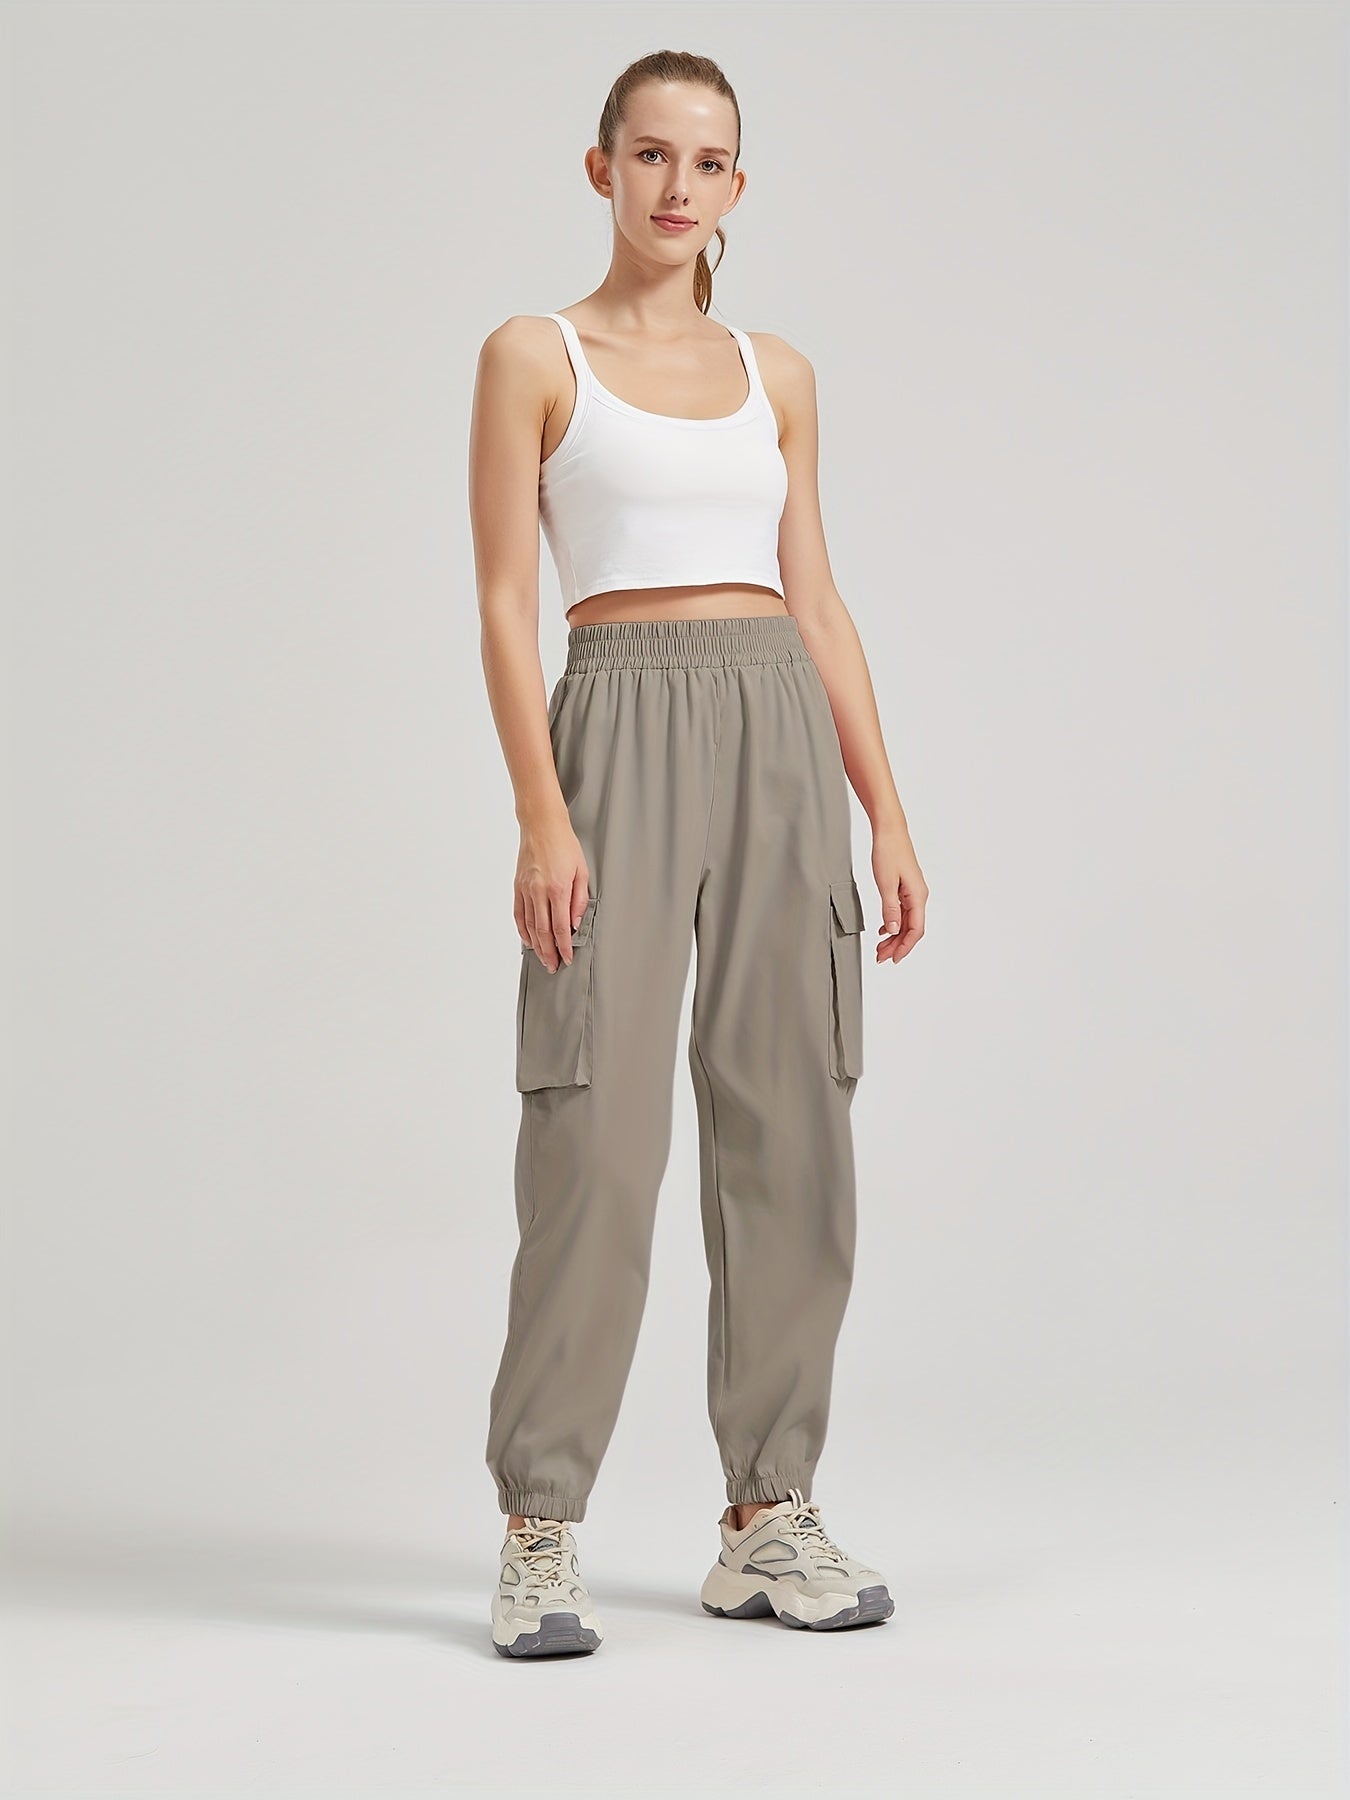 Antmvs Solid Color Casual Joggers Sweatpant, Cargo Loose High Waisted Pants With Pockets, Women's Athleisure